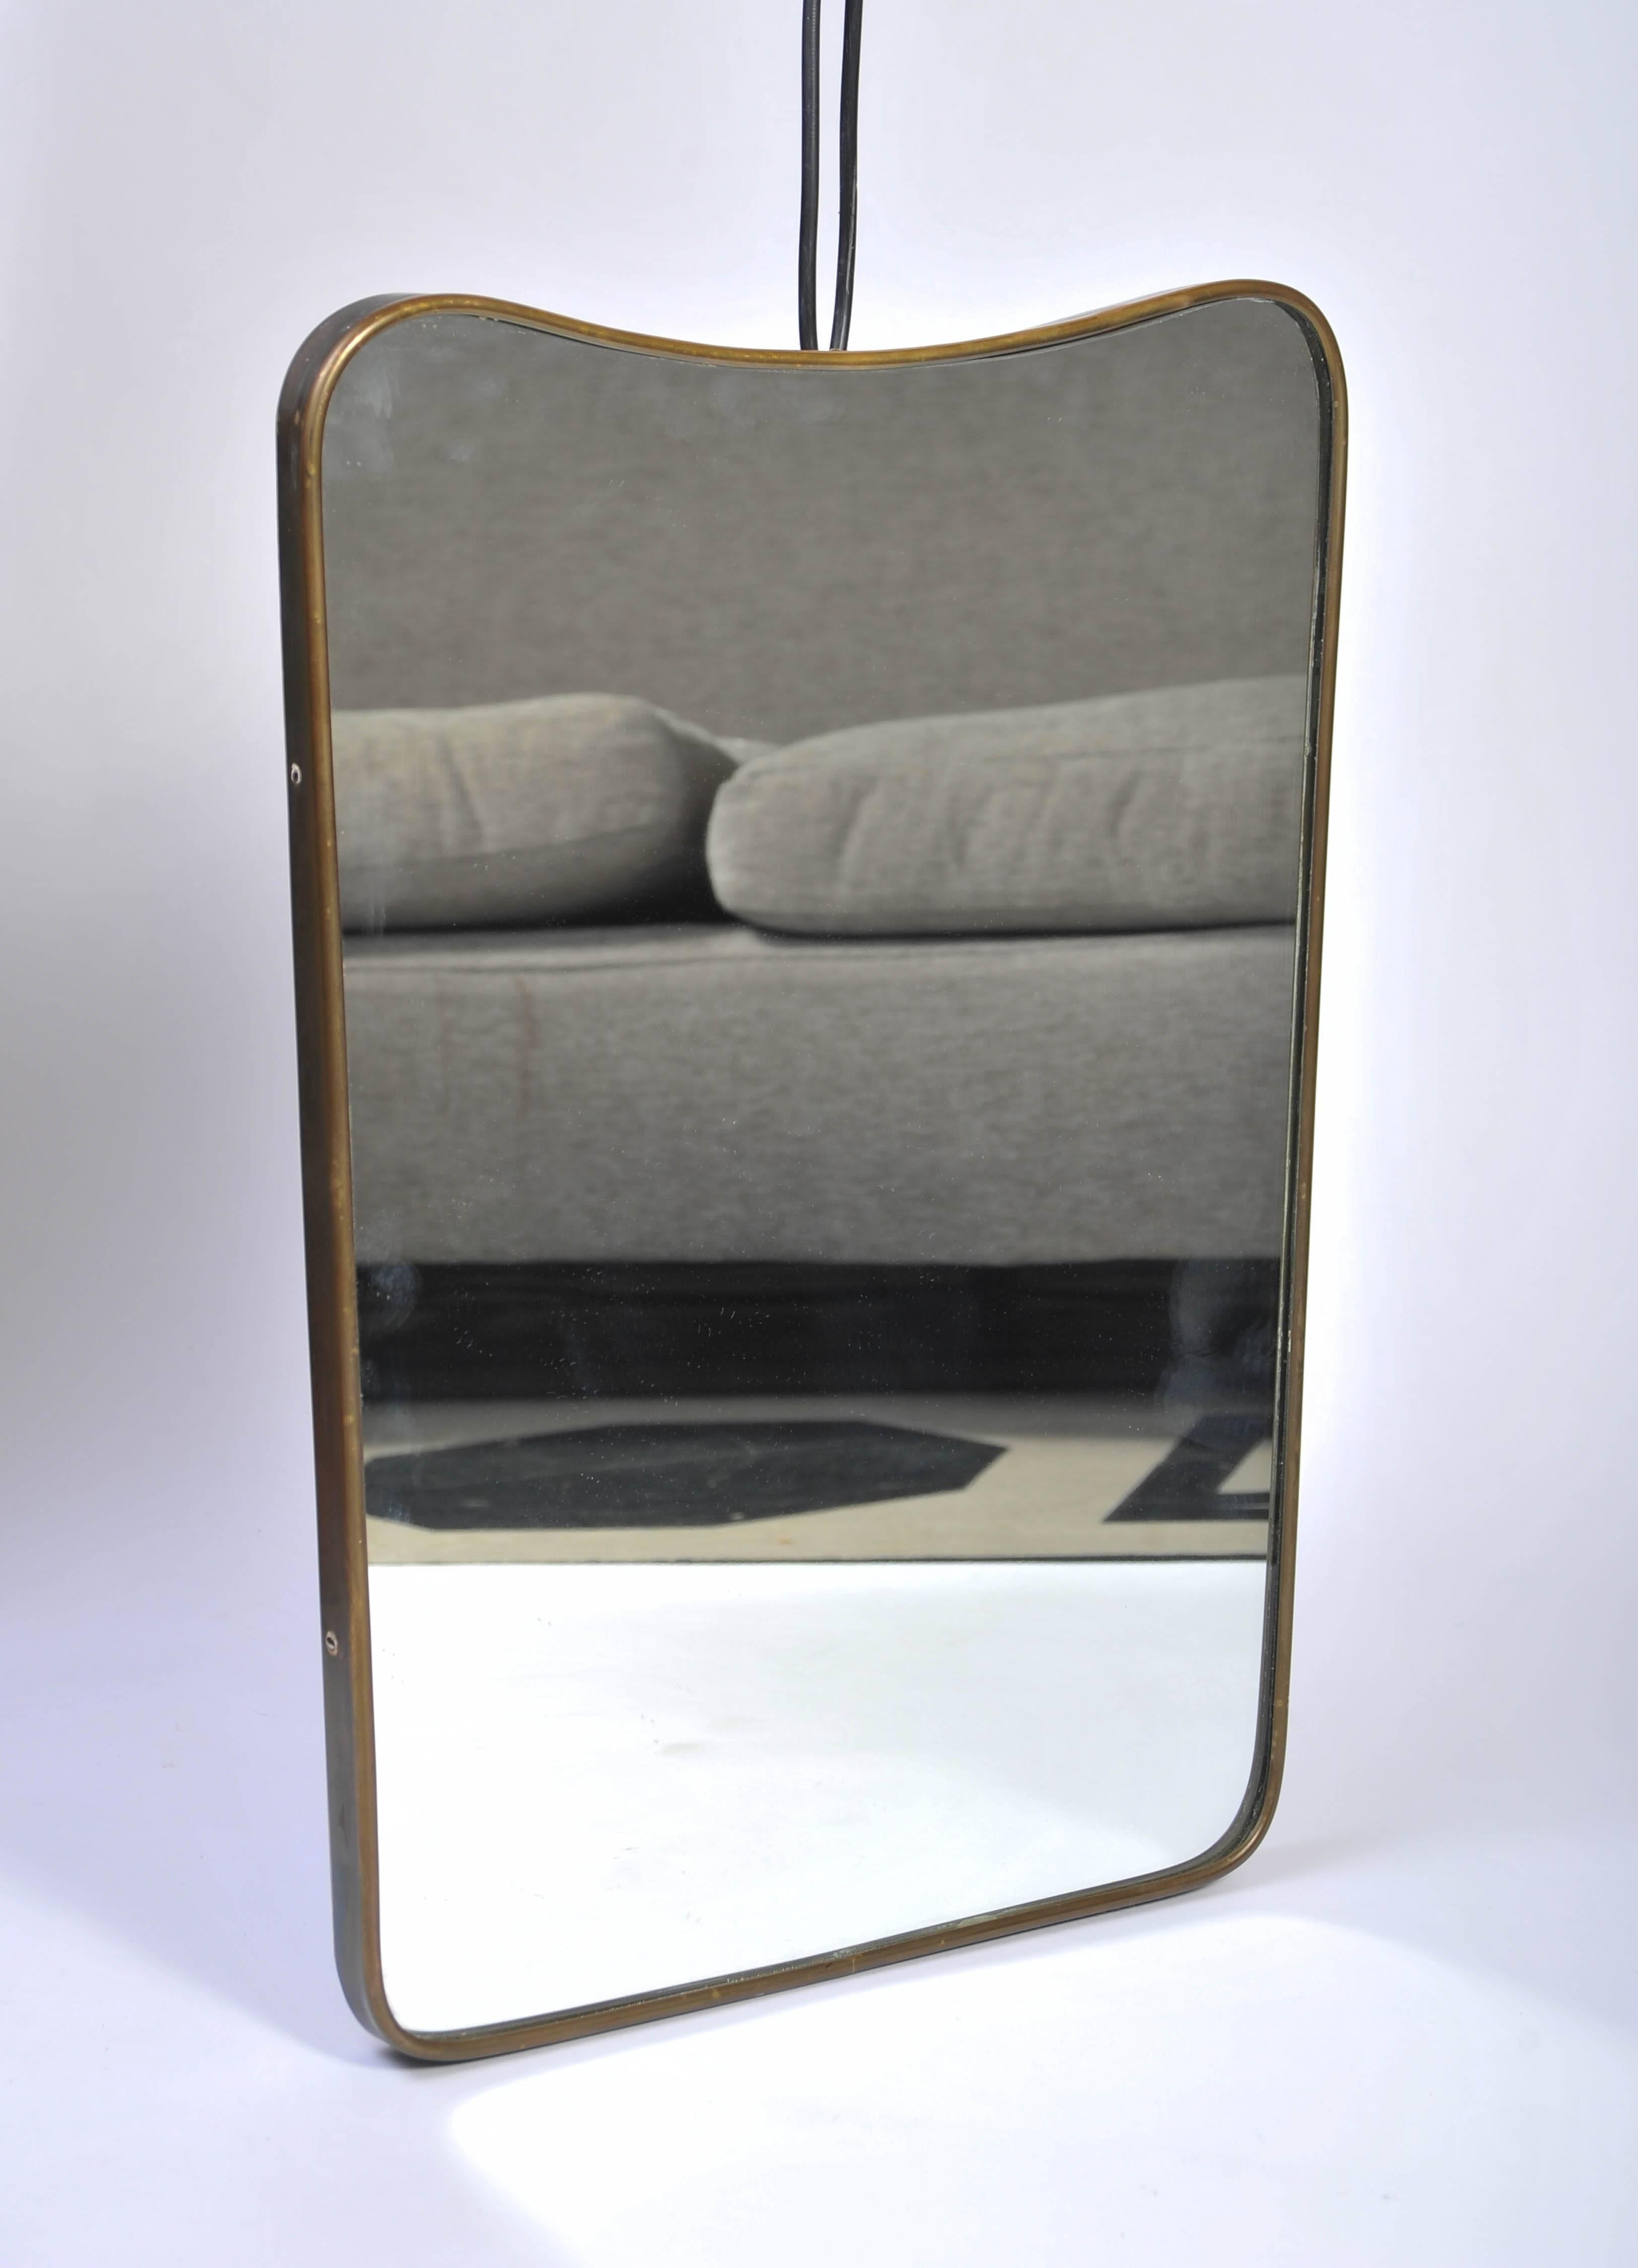 1960s Italian brass frame mirror by Gio Ponti dated on the back.